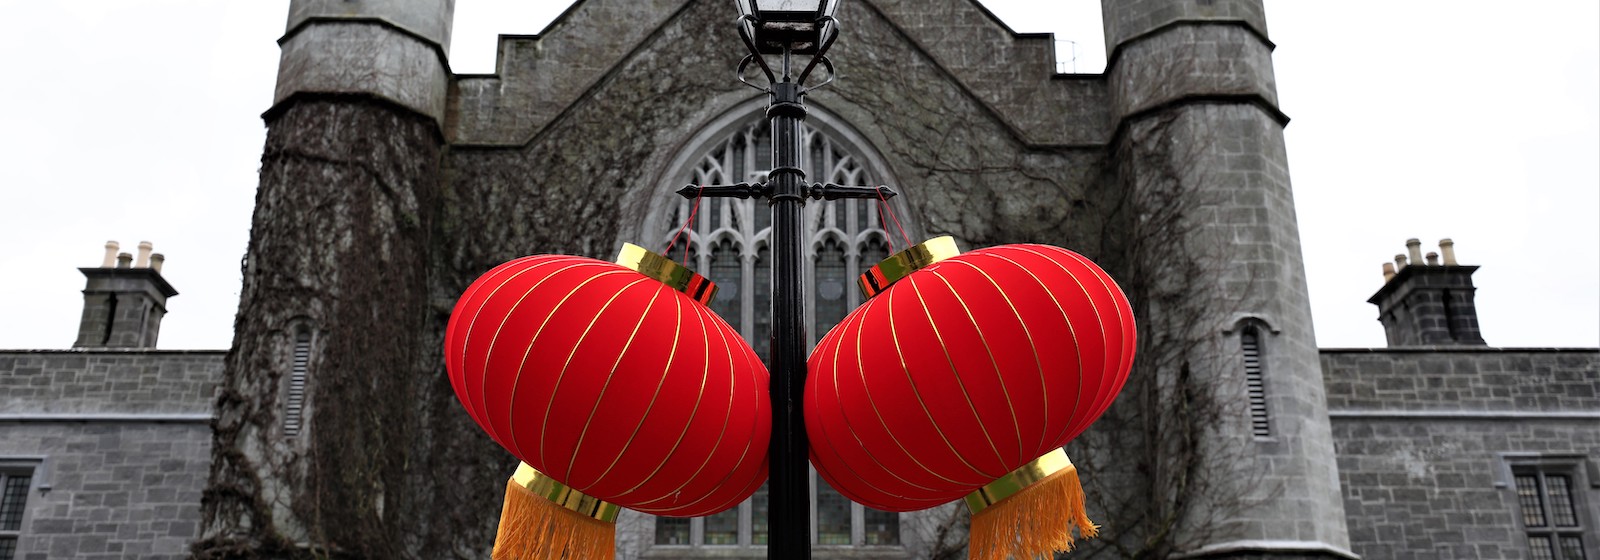 Welcome to the Confucius Institute of Chinese and Regenerative Medicine at University of Galway